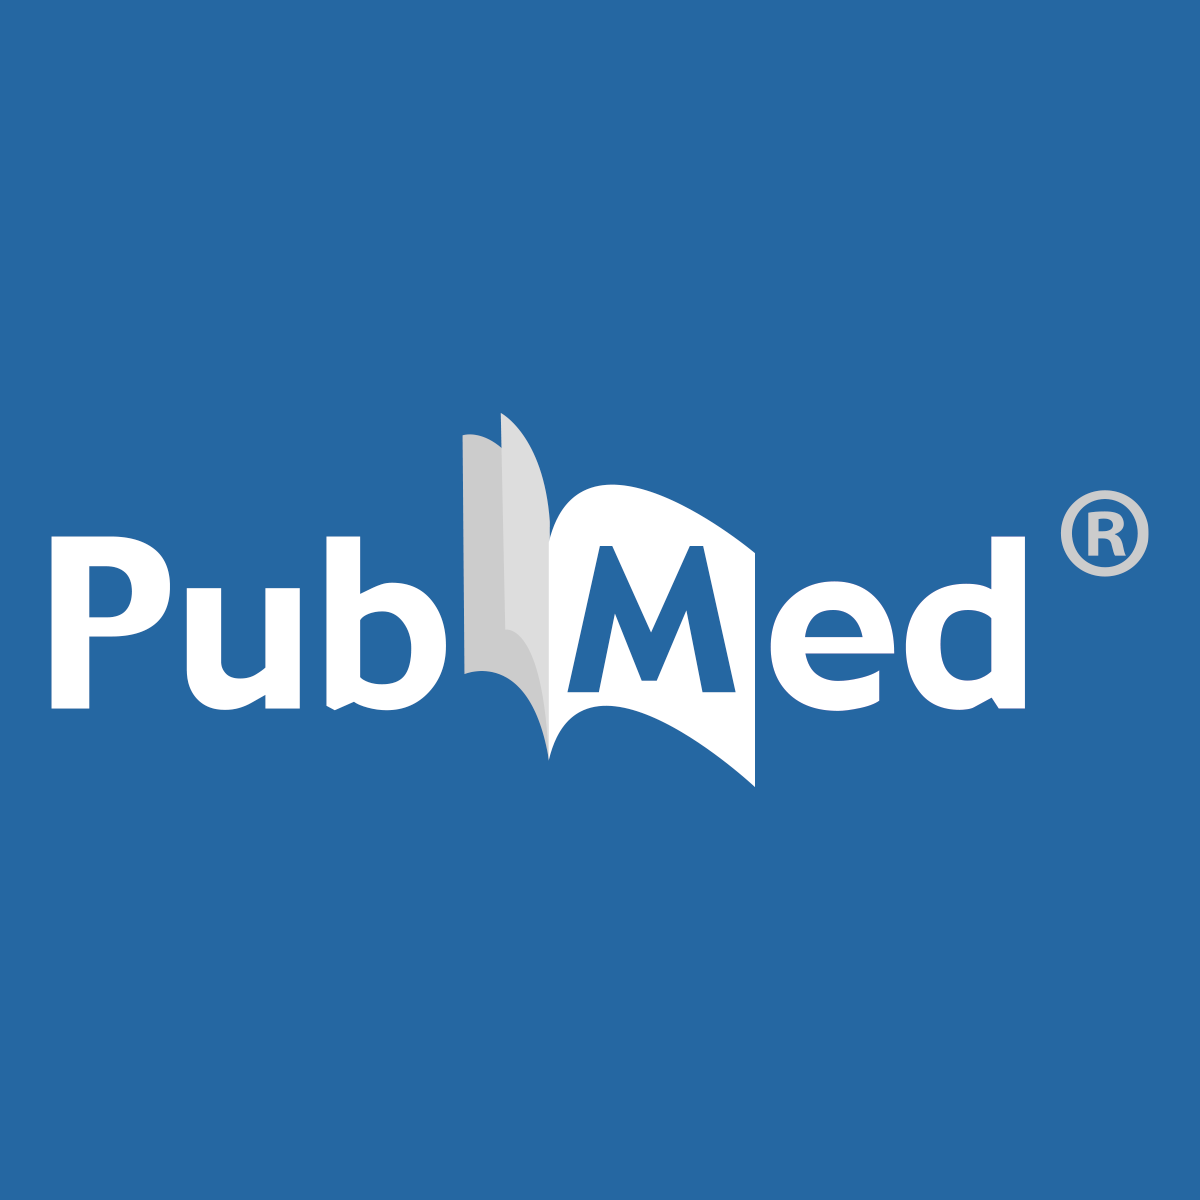 Concomitant use of statins and sodium-glucose co-transporter 2 inhibitors and the risk of myotoxicity reporting - A disproportionality analysis - PubMed